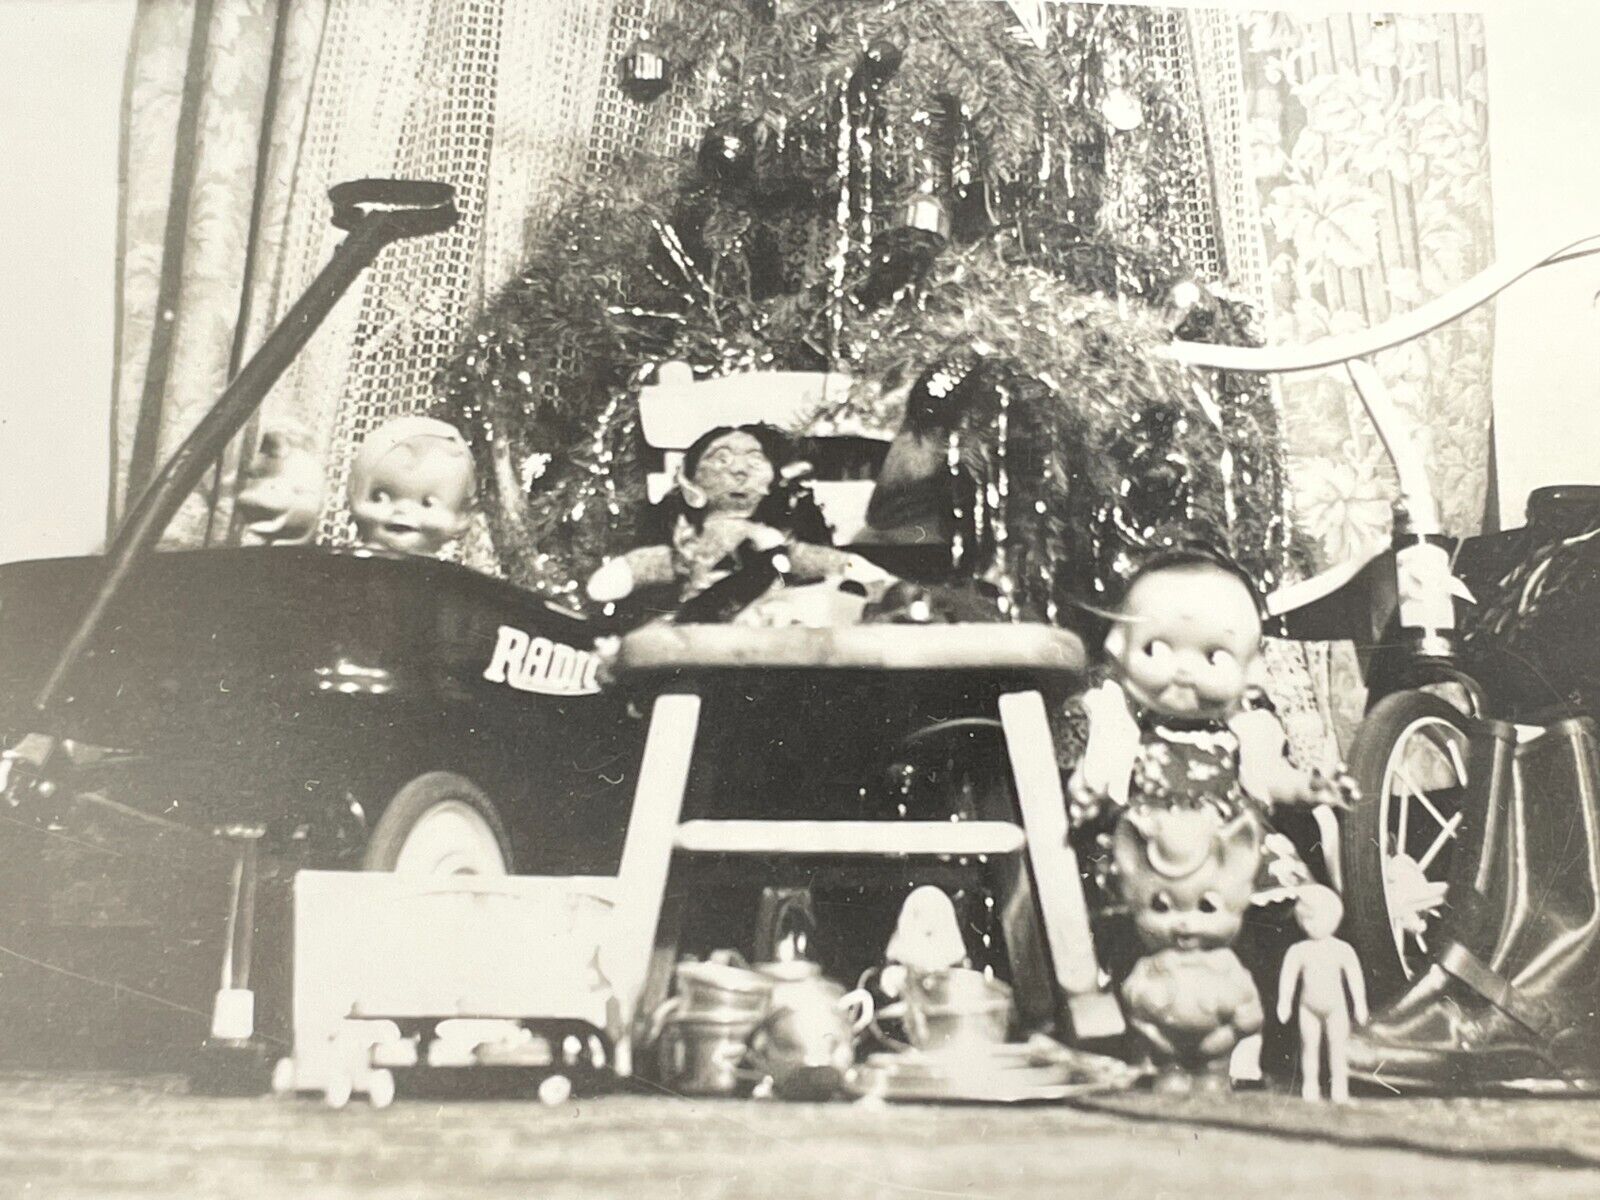 Z4 Photograph Christmas Morning Presents Dolls Wagon Toy Tricycle Tree 1947